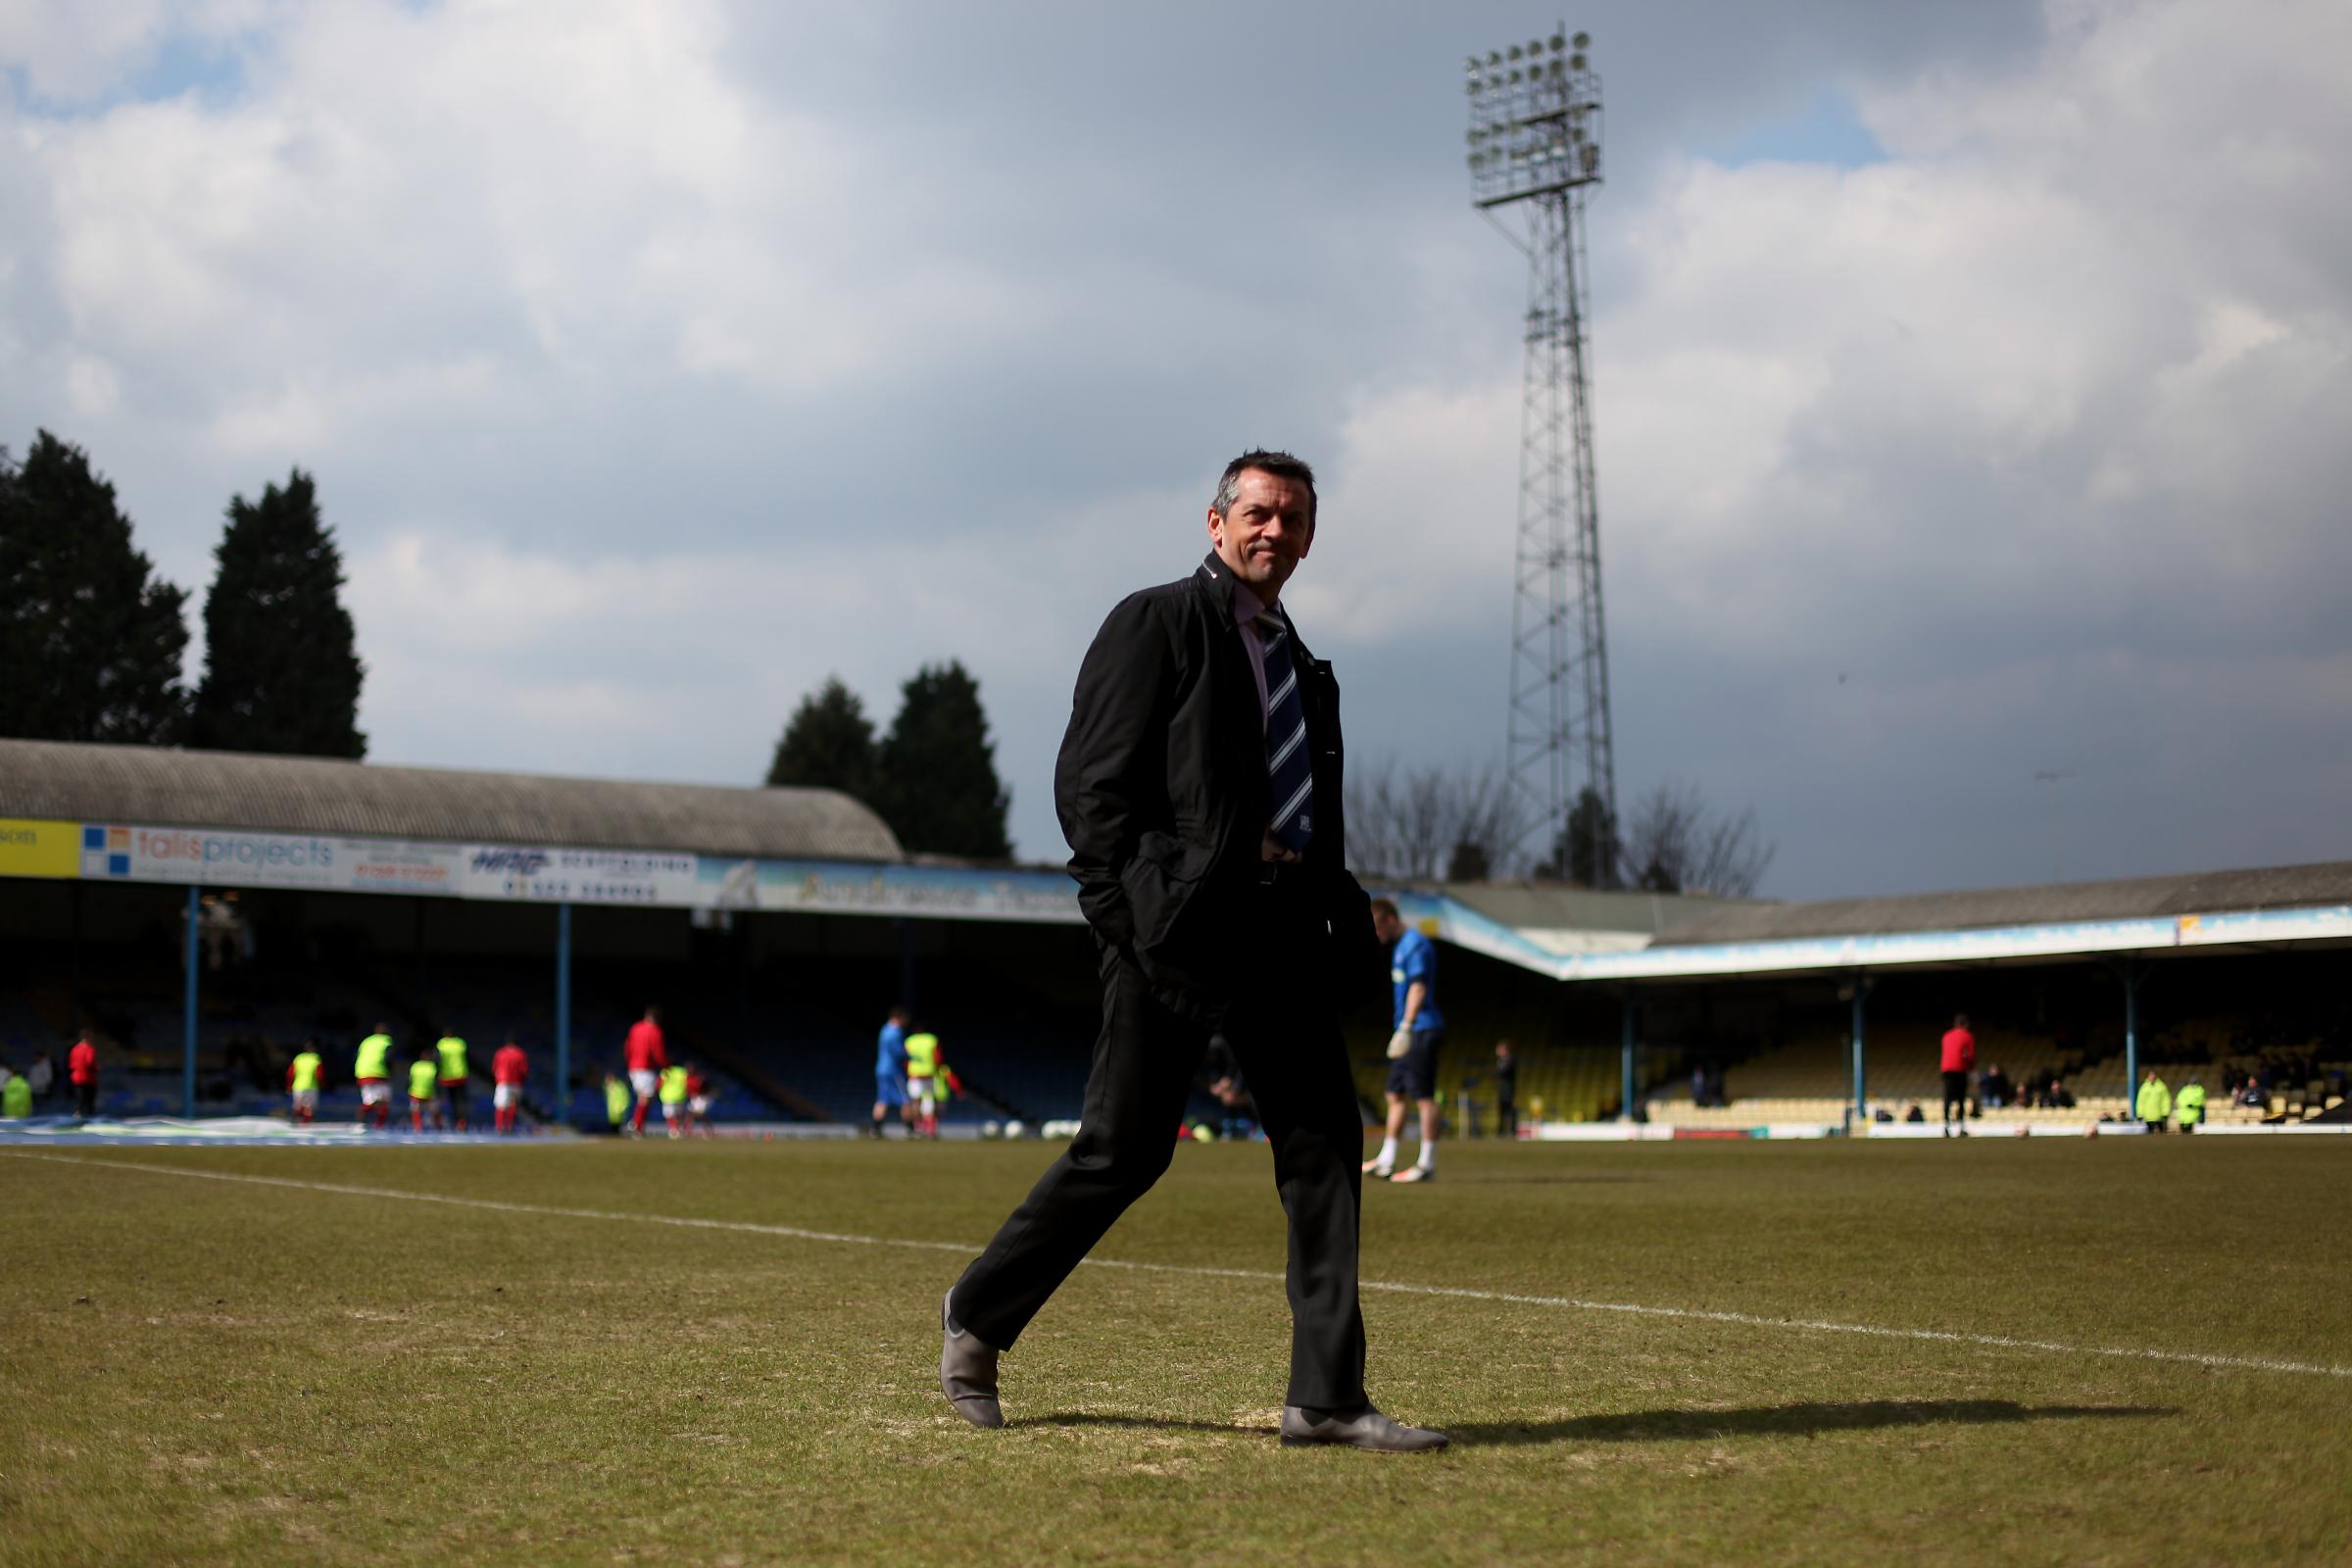 Back in the hotseat - Phil Brown sealed his return and was named as Mark Molesleys successor last week